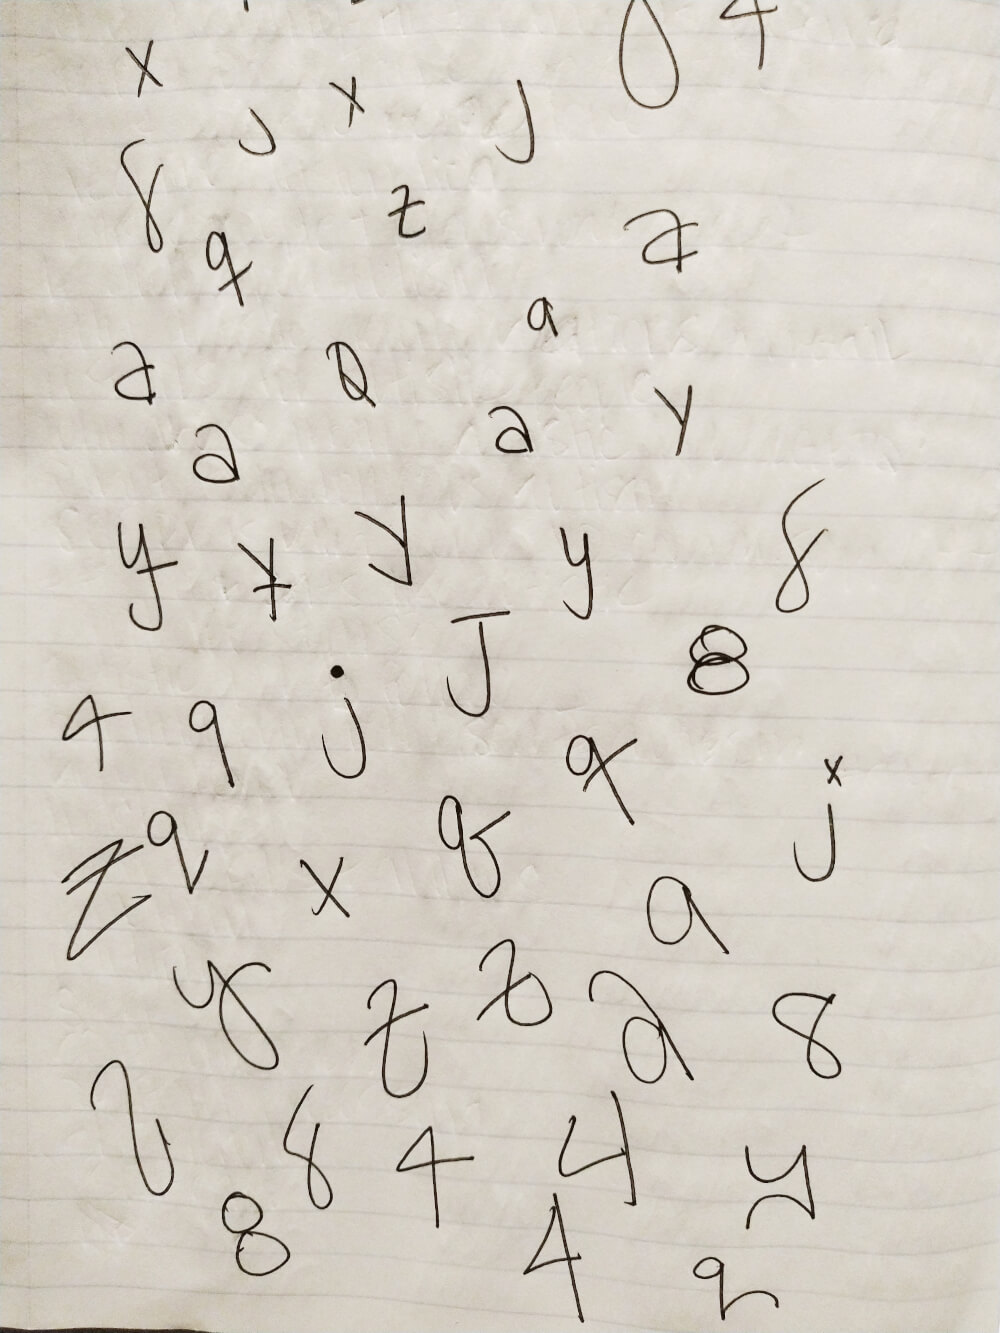 a, j, q, x, y, z, 2, 8 written on notebook paper in different handwriting styles